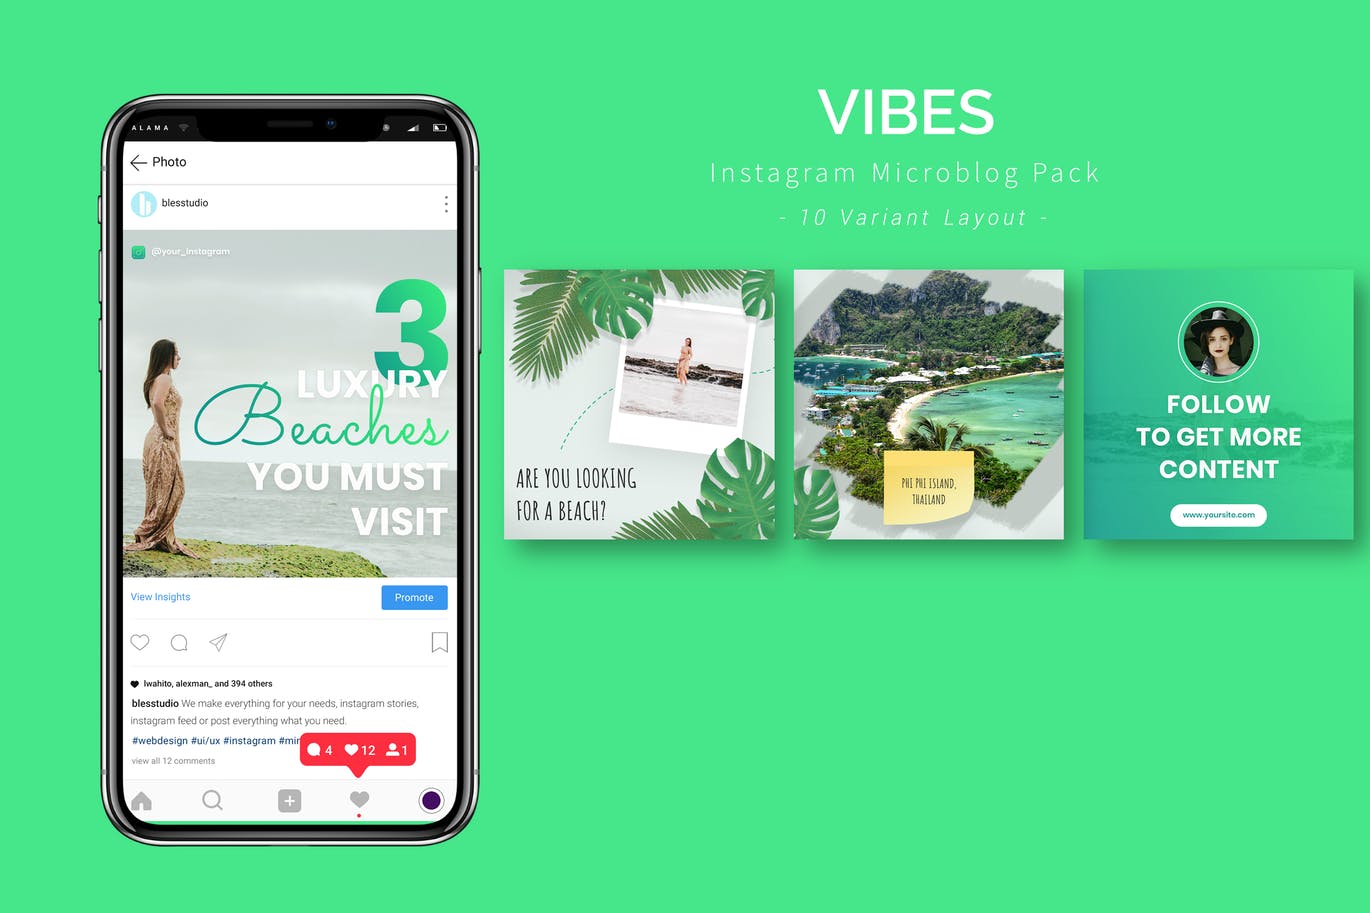 Vibes - Instagram Microblog Pack